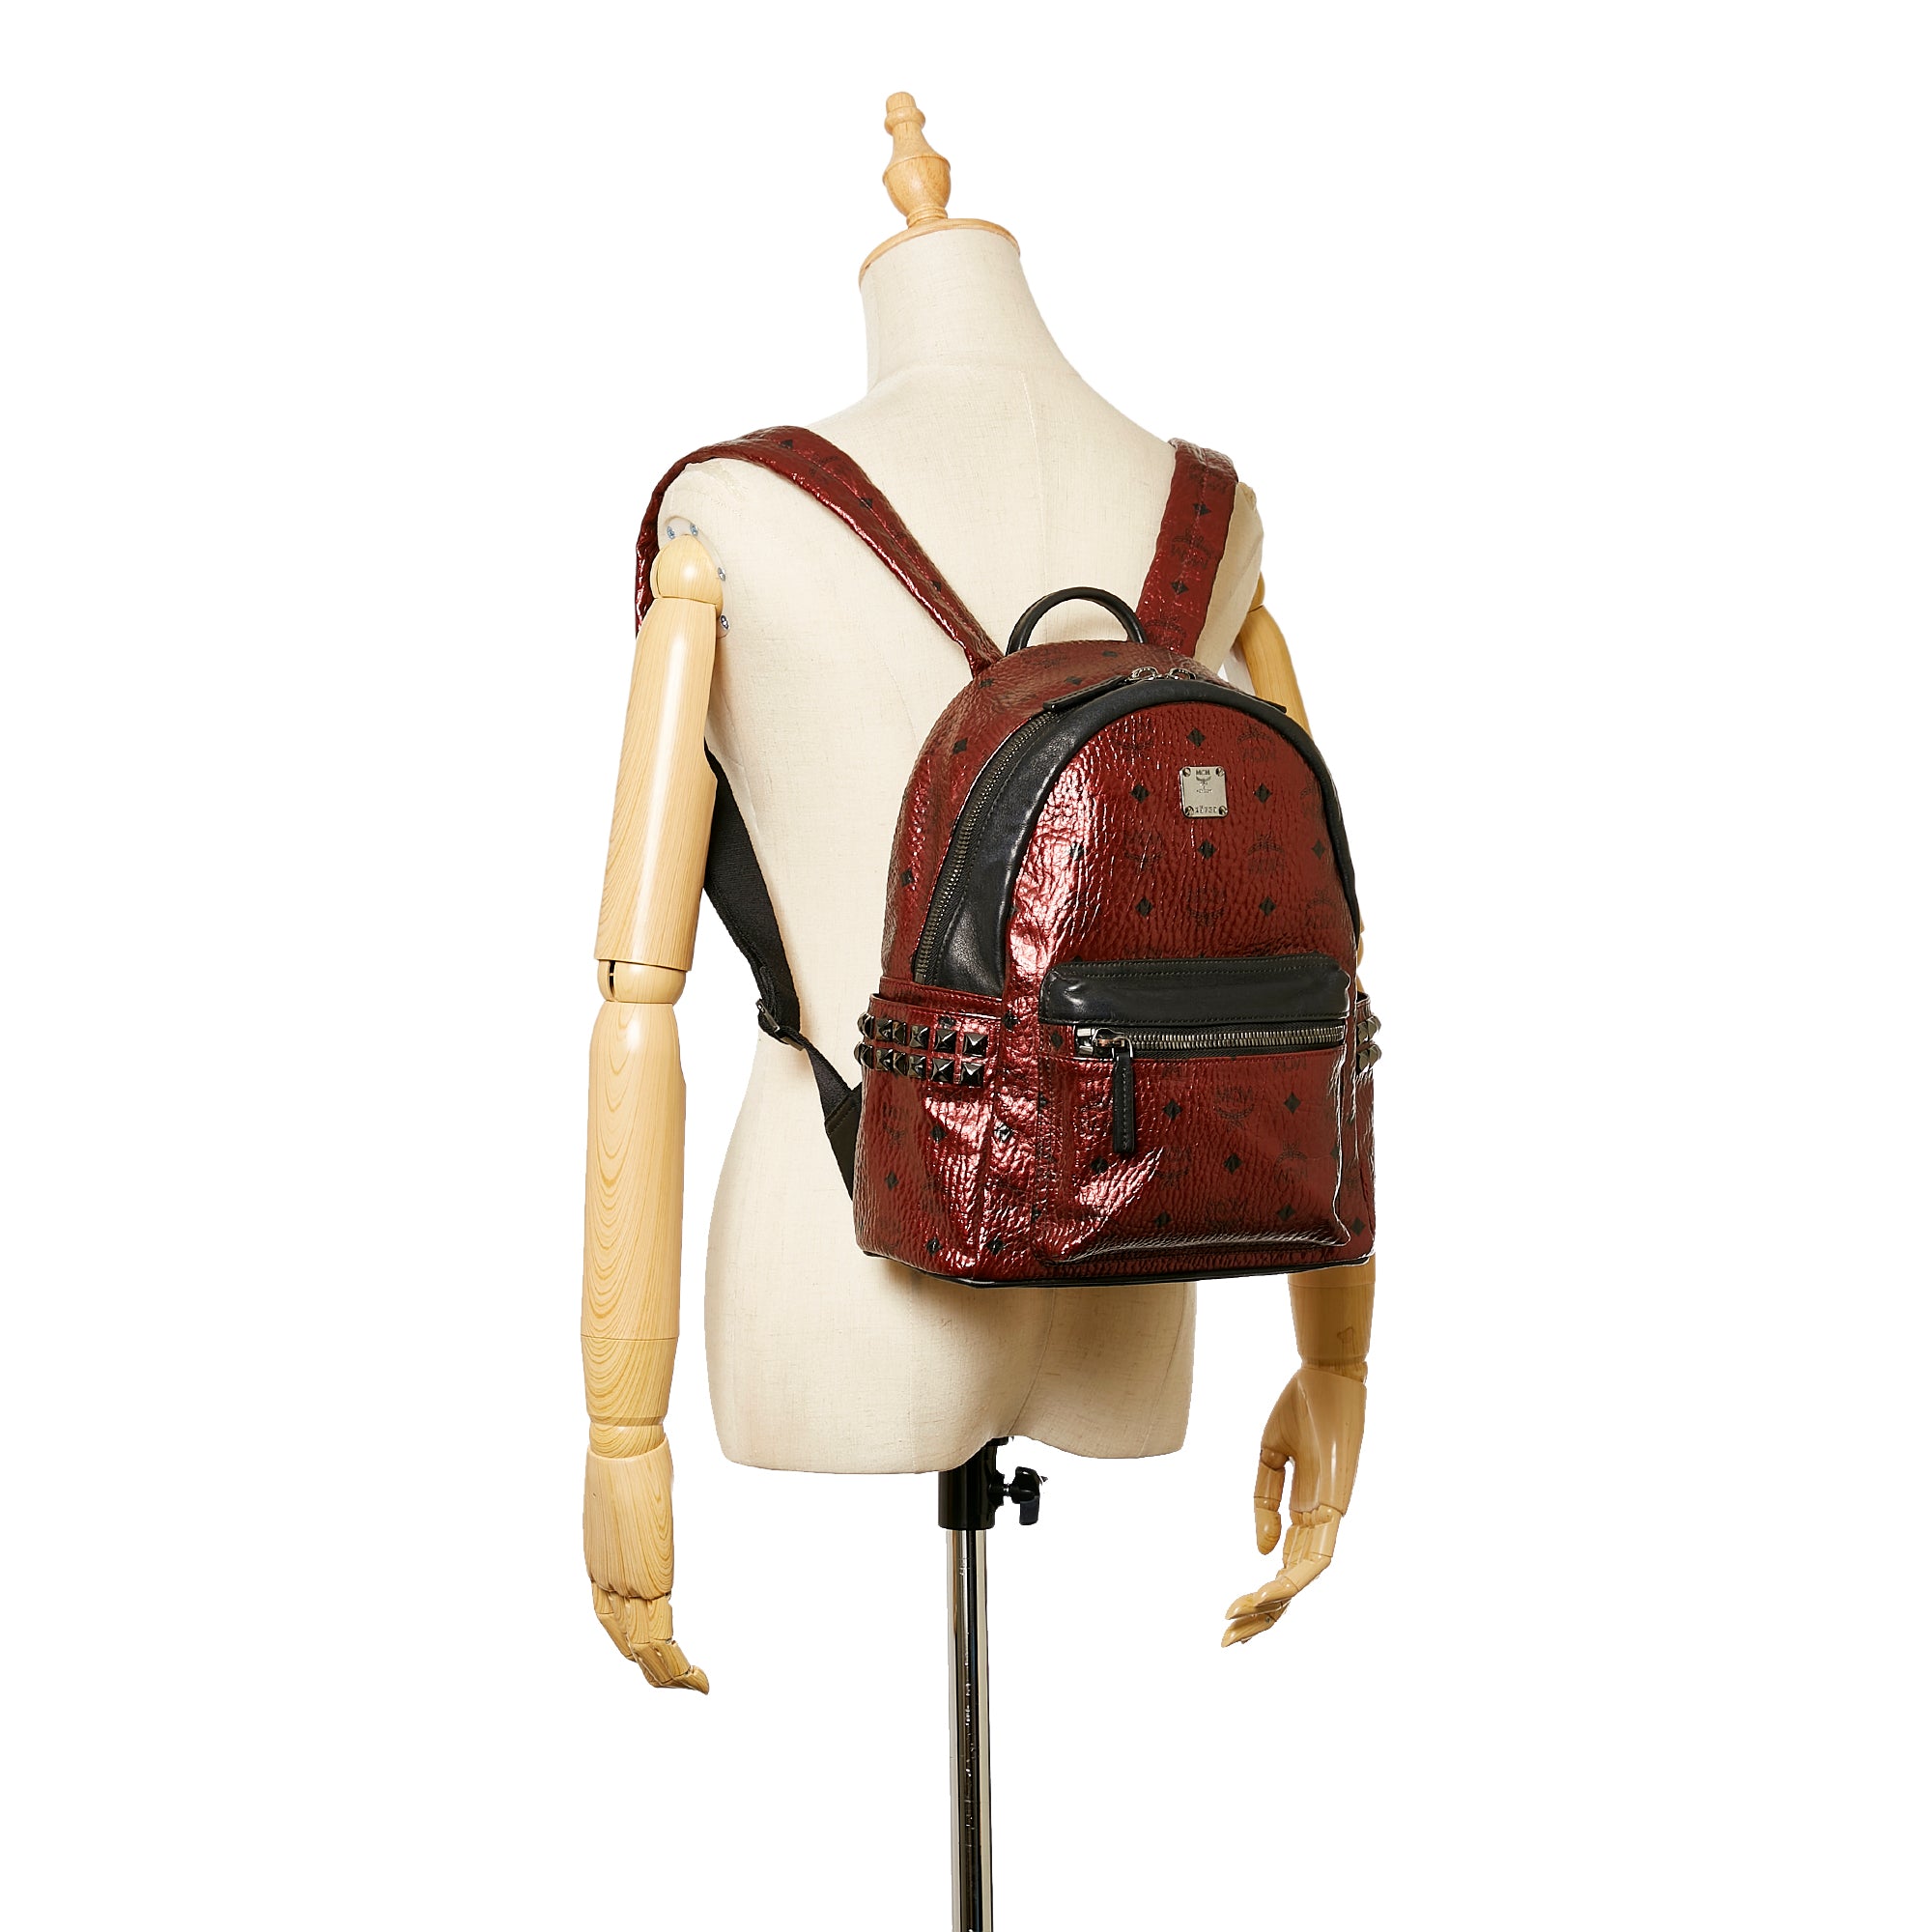 Auth MCM Red Visetos Jacquard Leather Backpack -  New Zealand